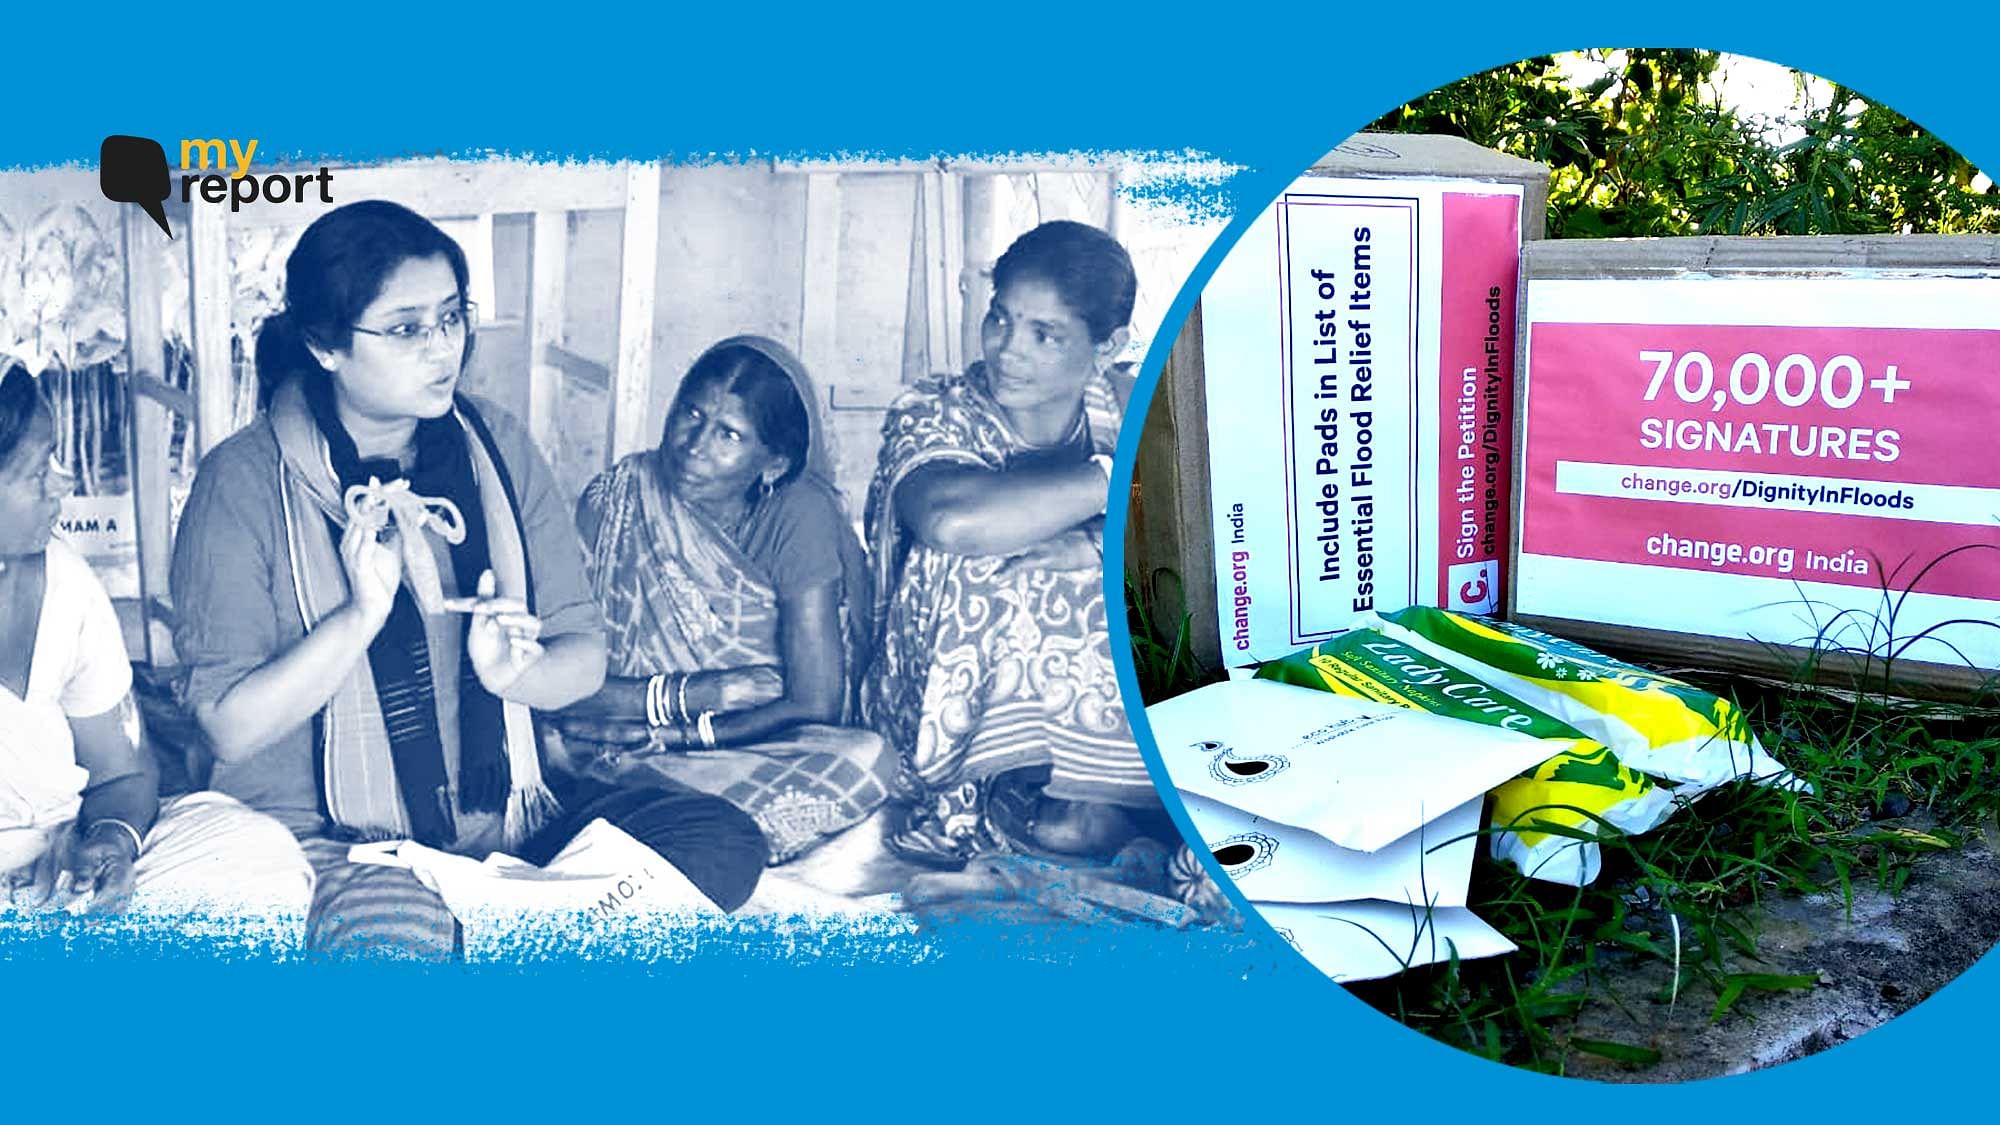 After Mayuri Bhattacharjee’s petition, sanitary napkins will be included in Assam’s flood relief kits.